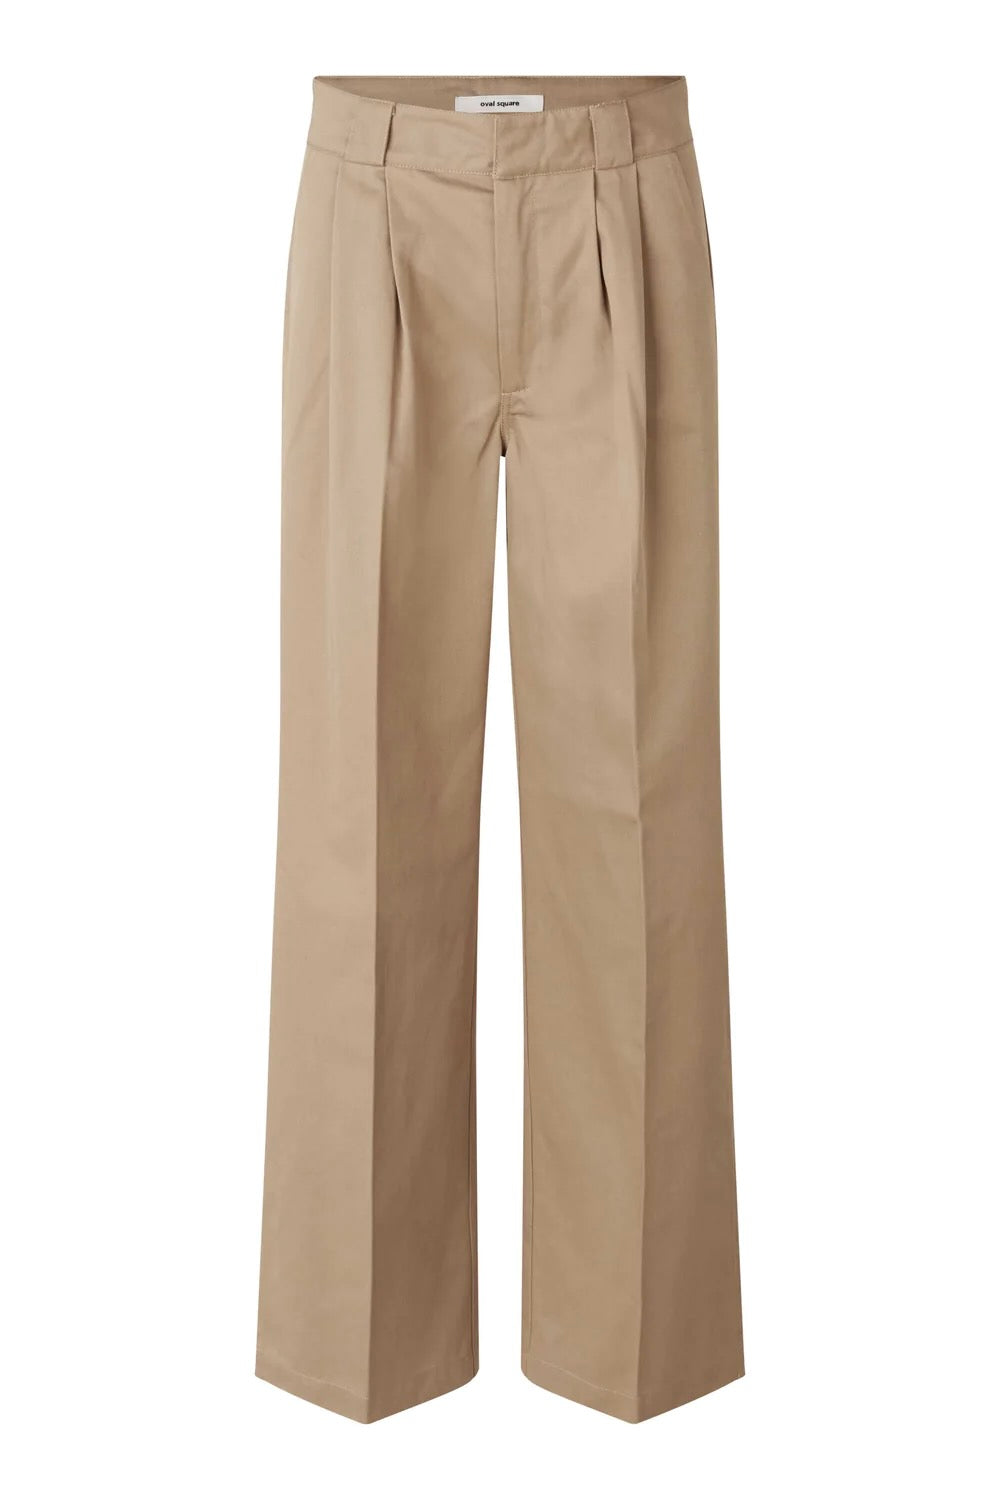 OVAL SQUARE - OSRiots Trousers - Dale